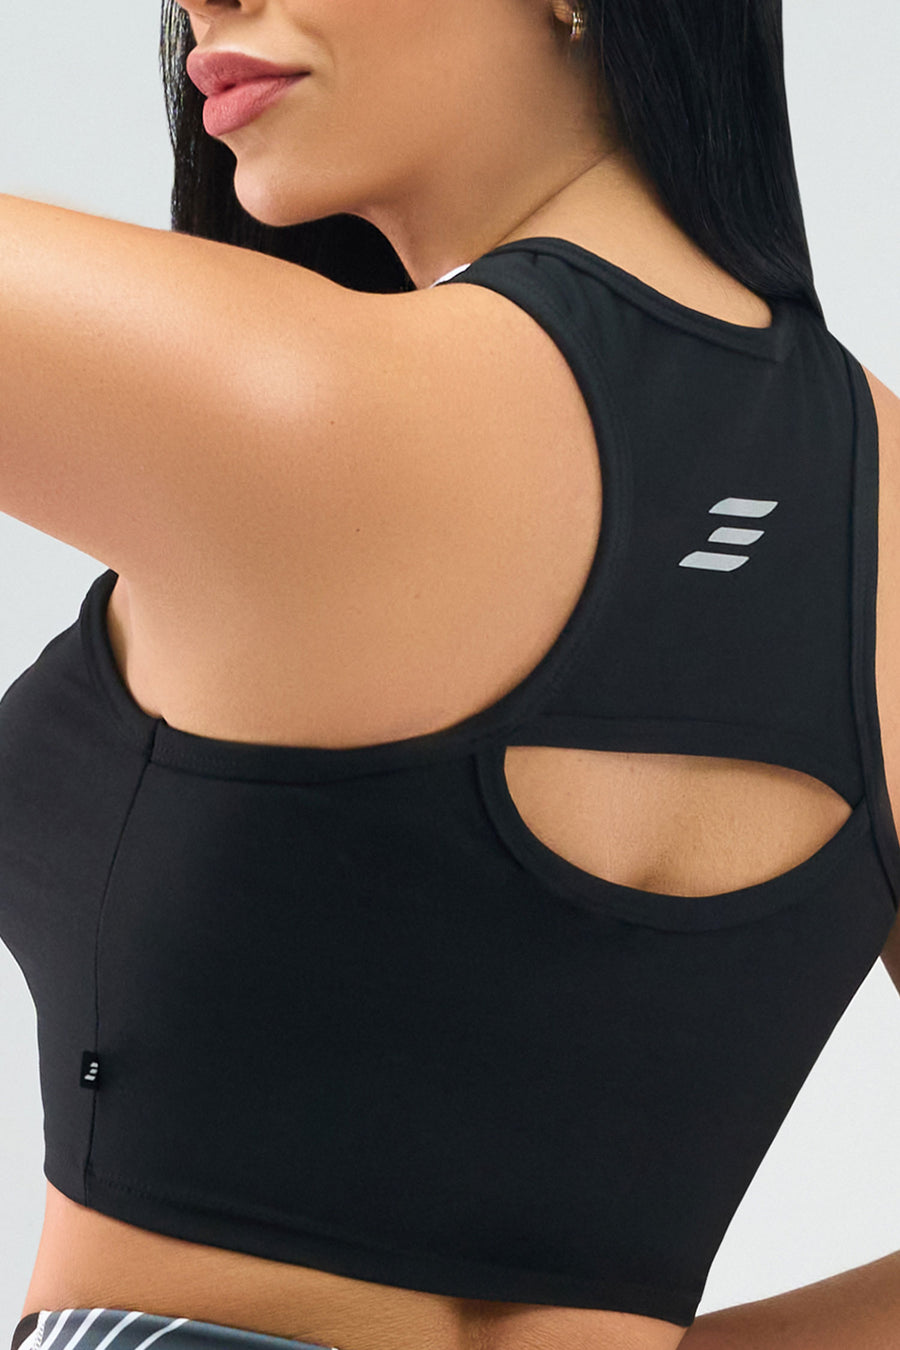 TOP DEPORTIVO 6232 FIT